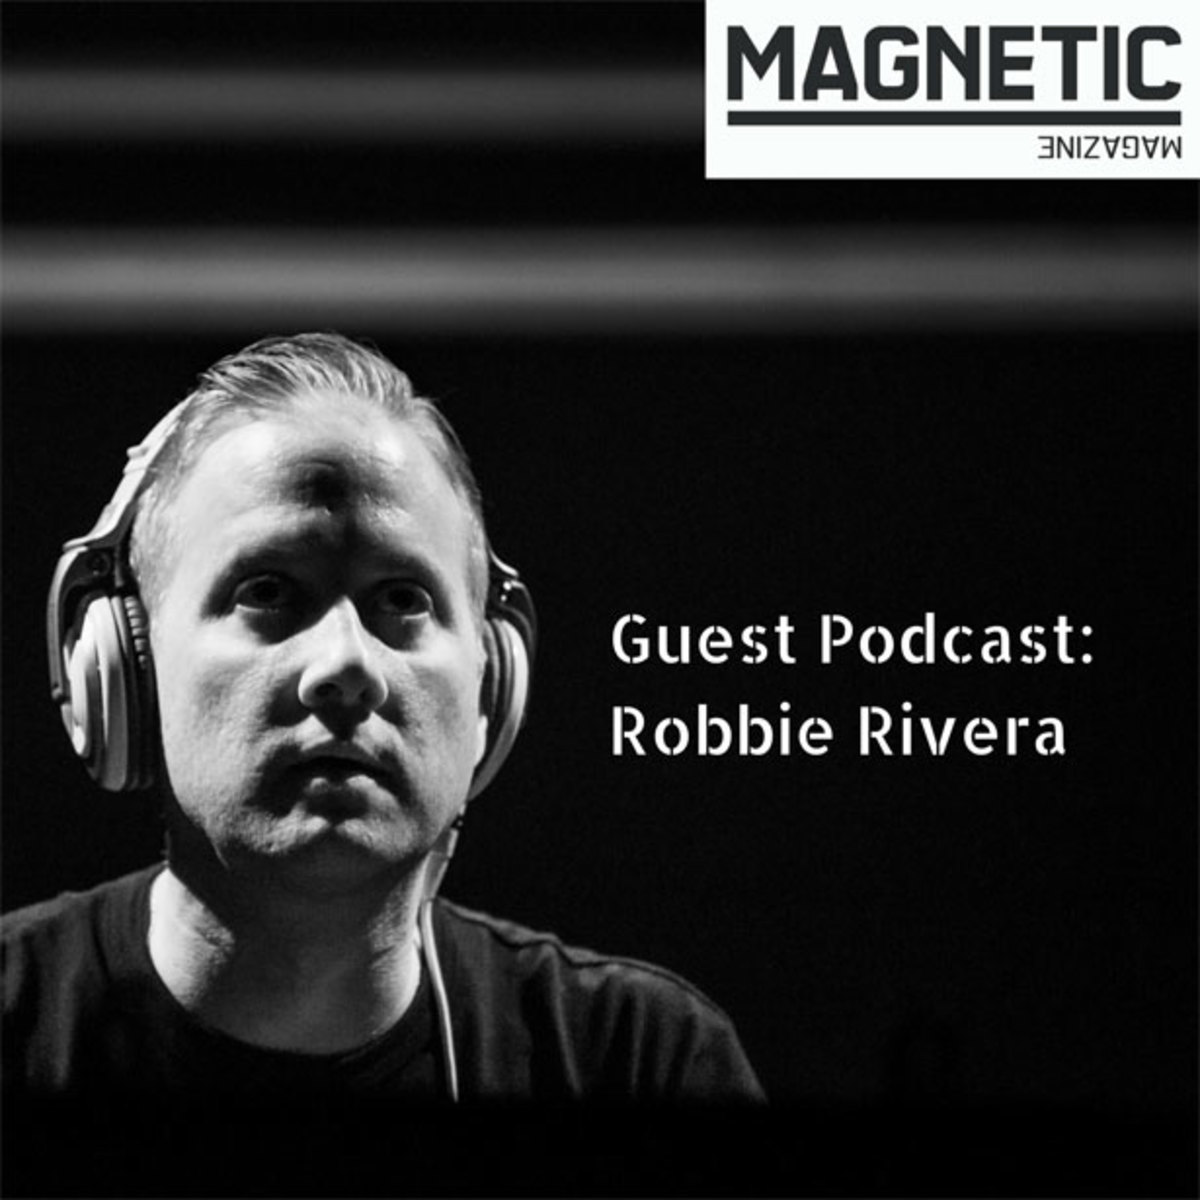 Magnetic Magazine Guest Podcast And Interview: Robbie Rivera